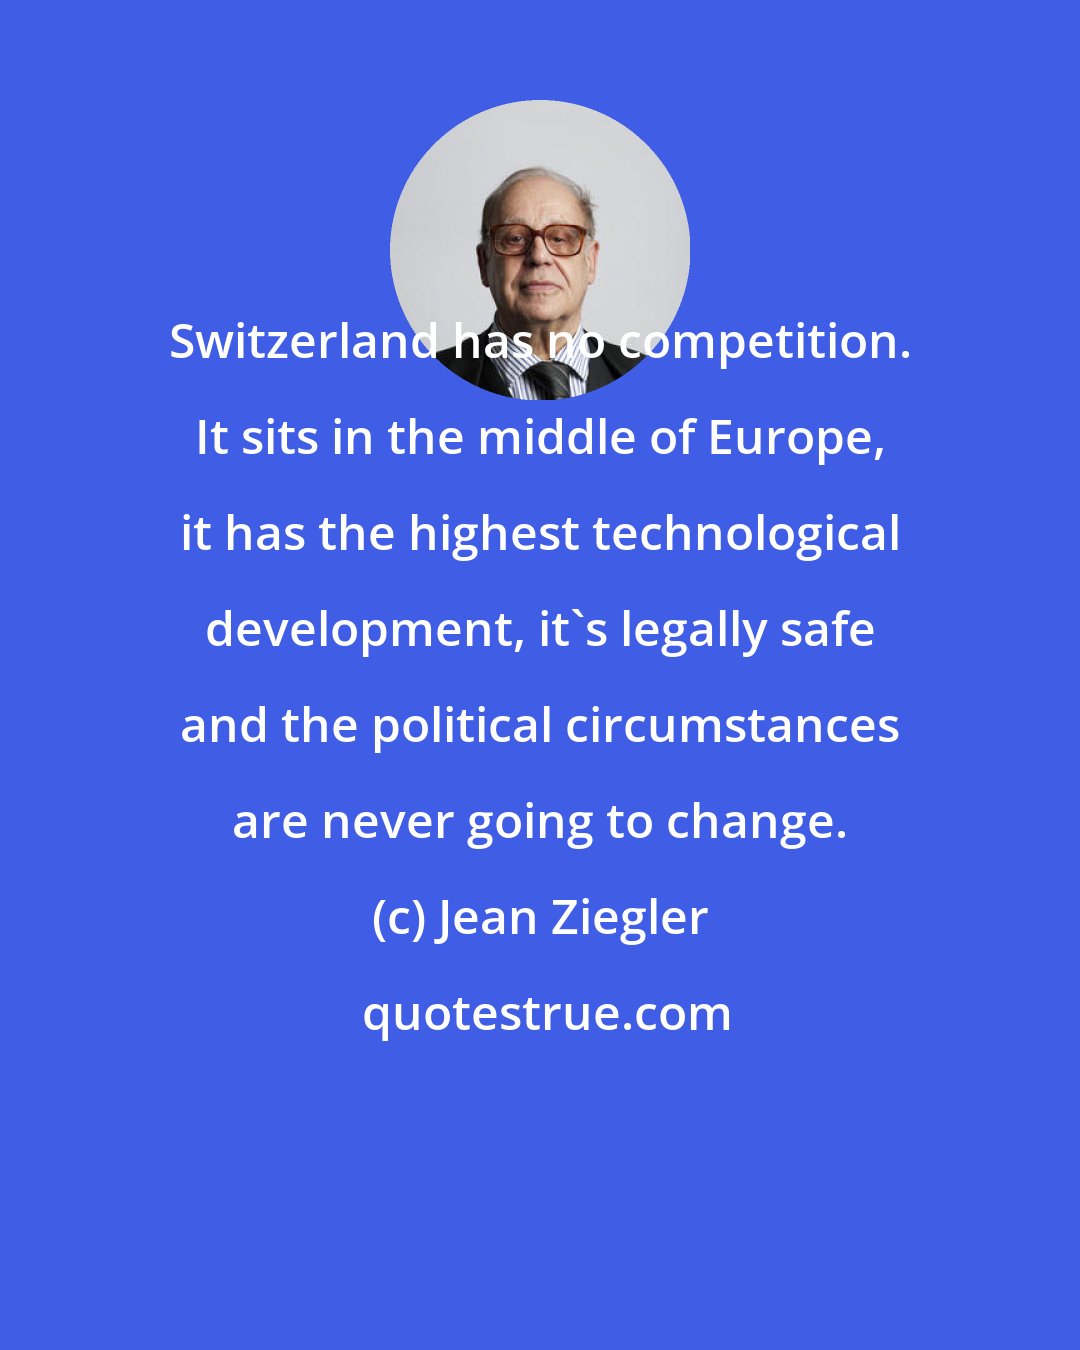 Jean Ziegler: Switzerland has no competition. It sits in the middle of Europe, it has the highest technological development, it's legally safe and the political circumstances are never going to change.